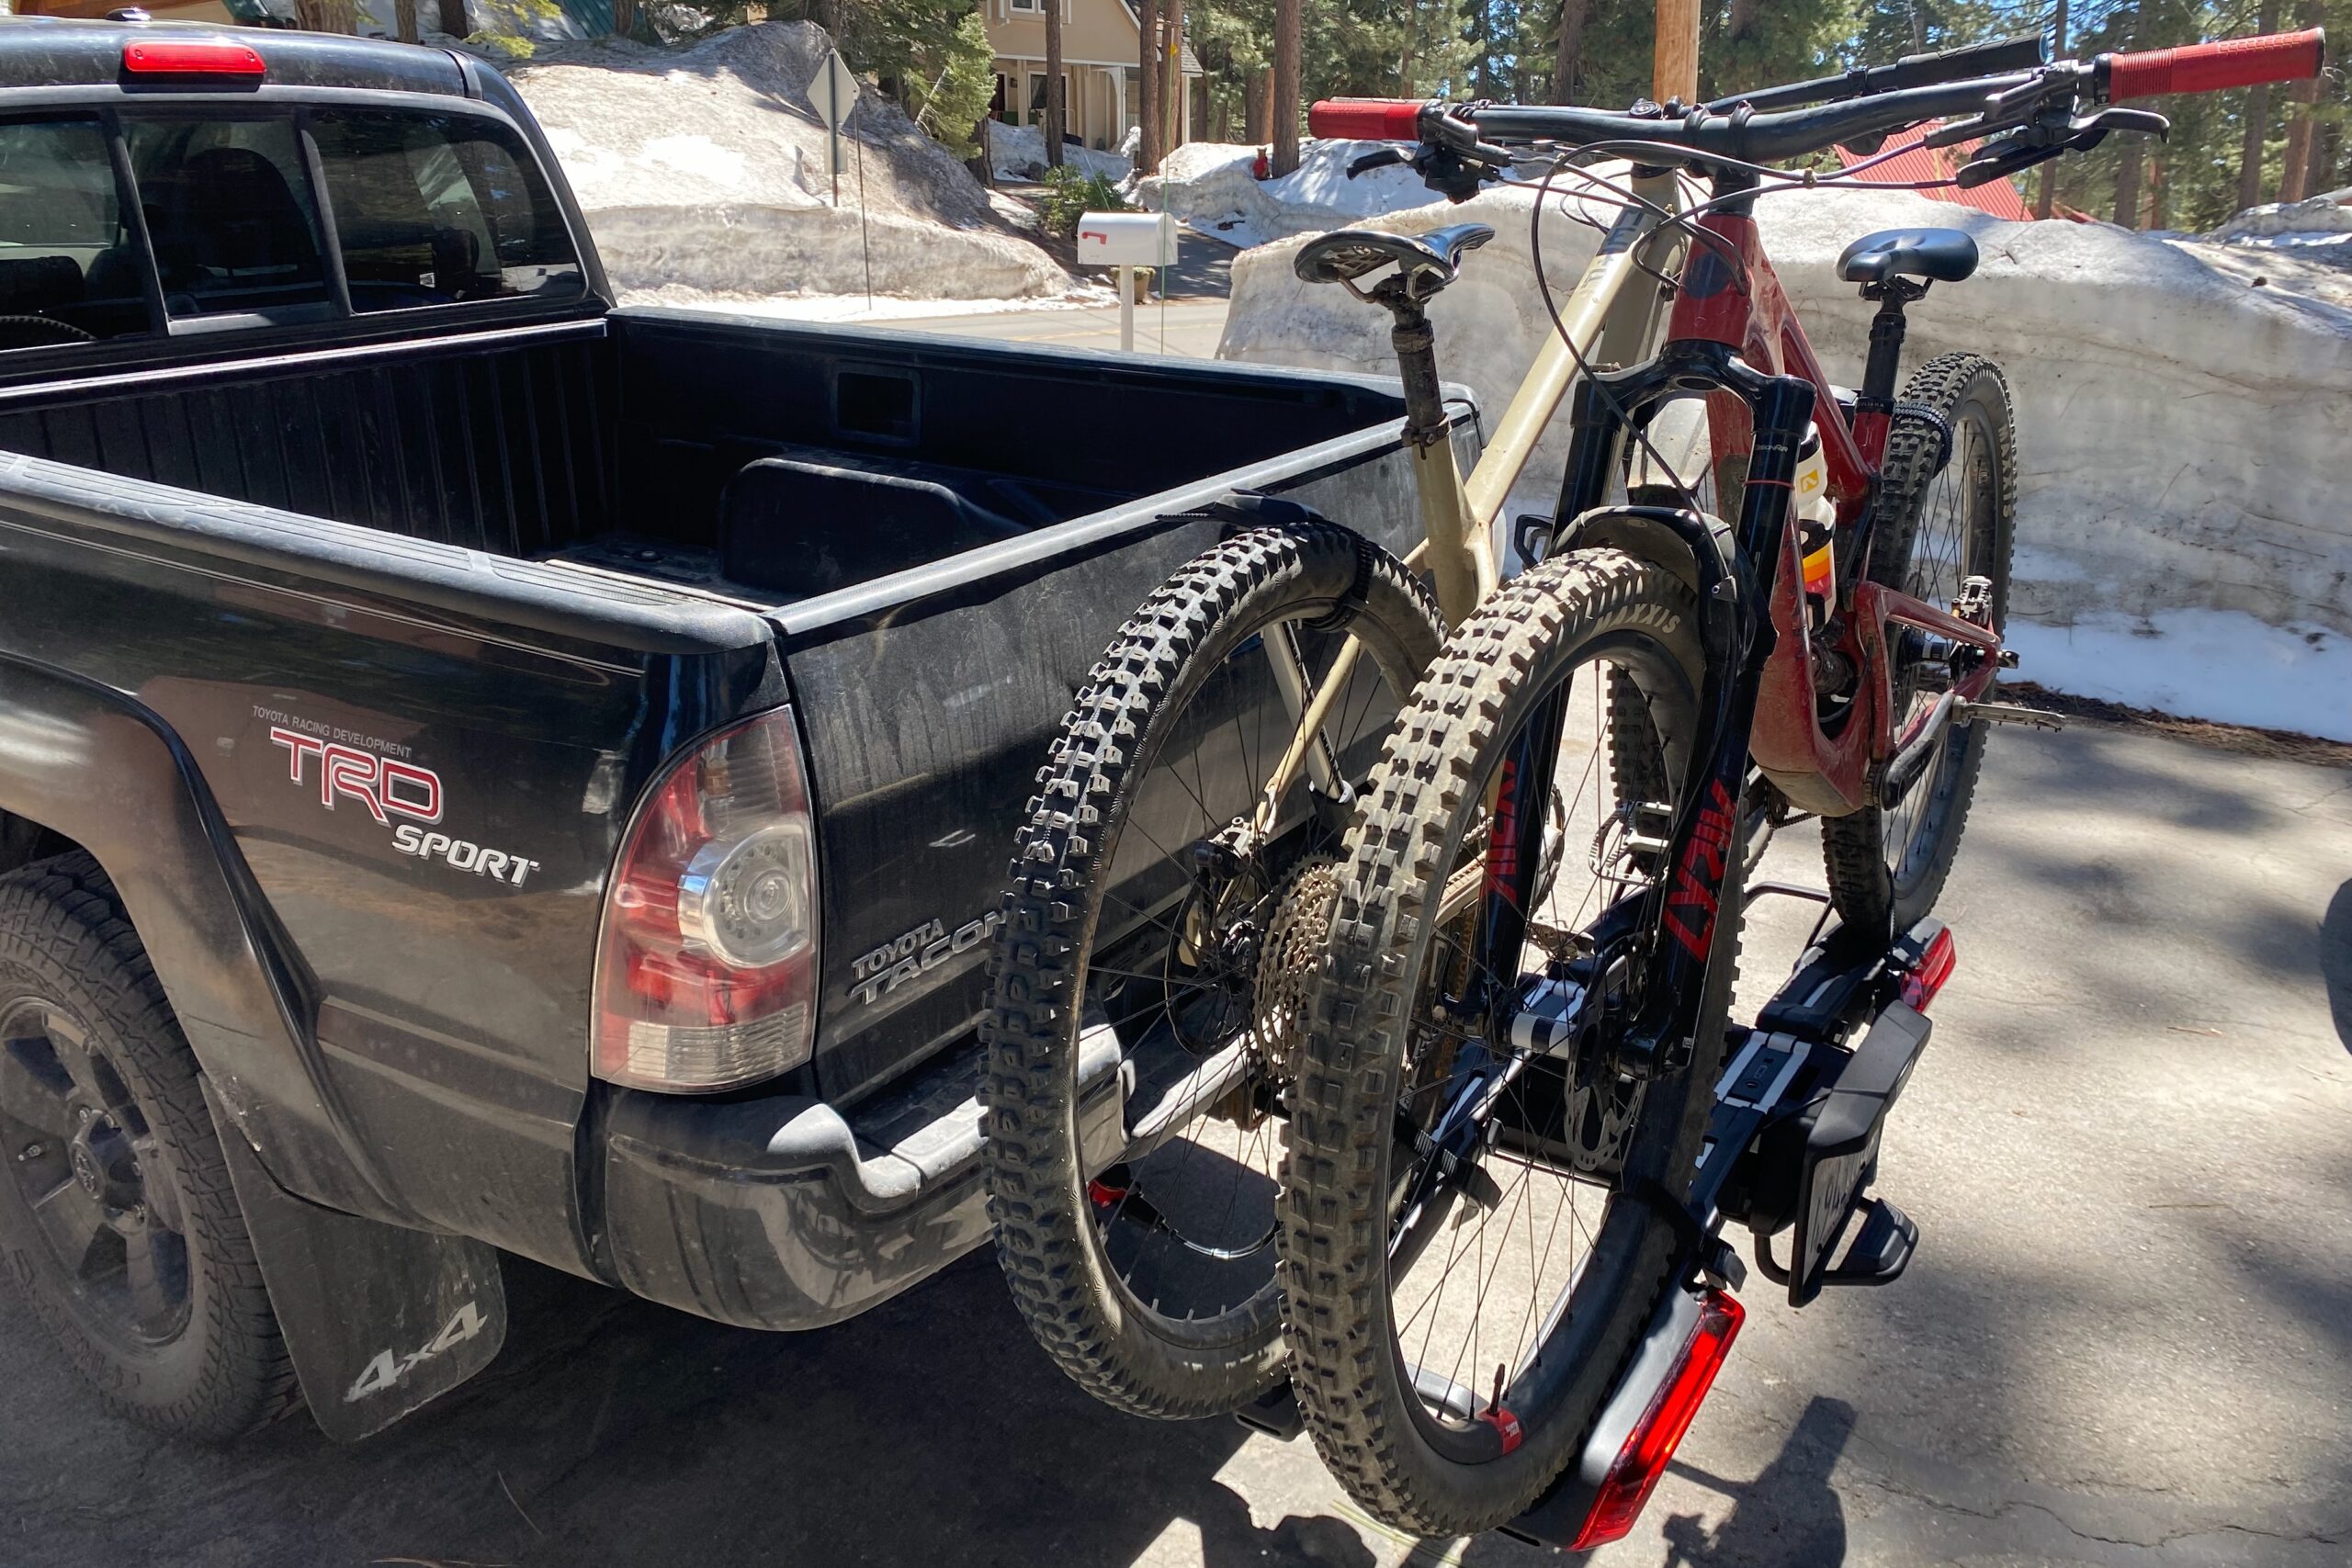 The Thule Epos loaded with 2 mountain bikes